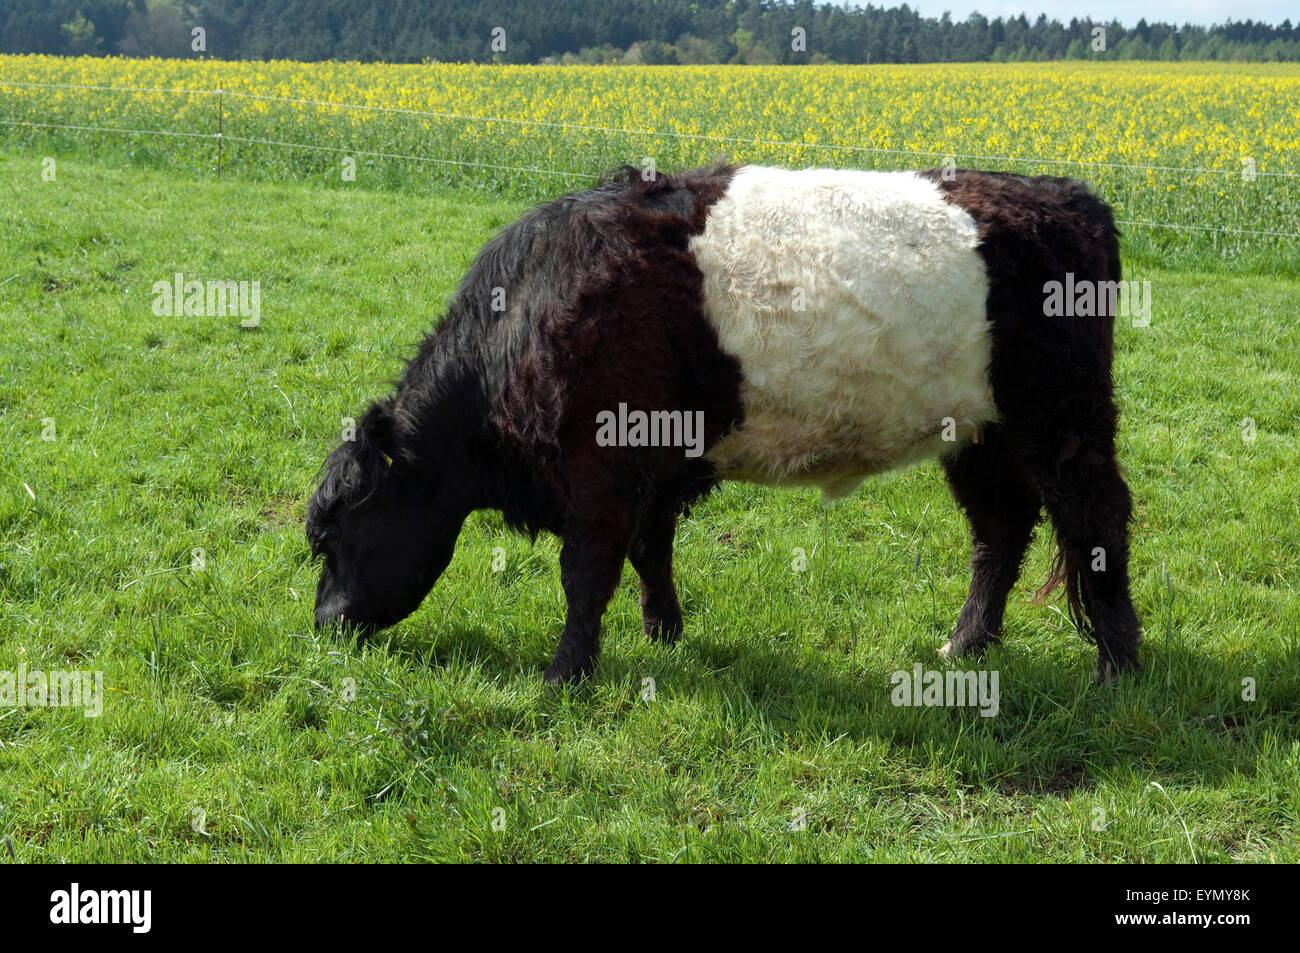 Galloway-Sattelrind Belted Galloway,,, Banque D'Images